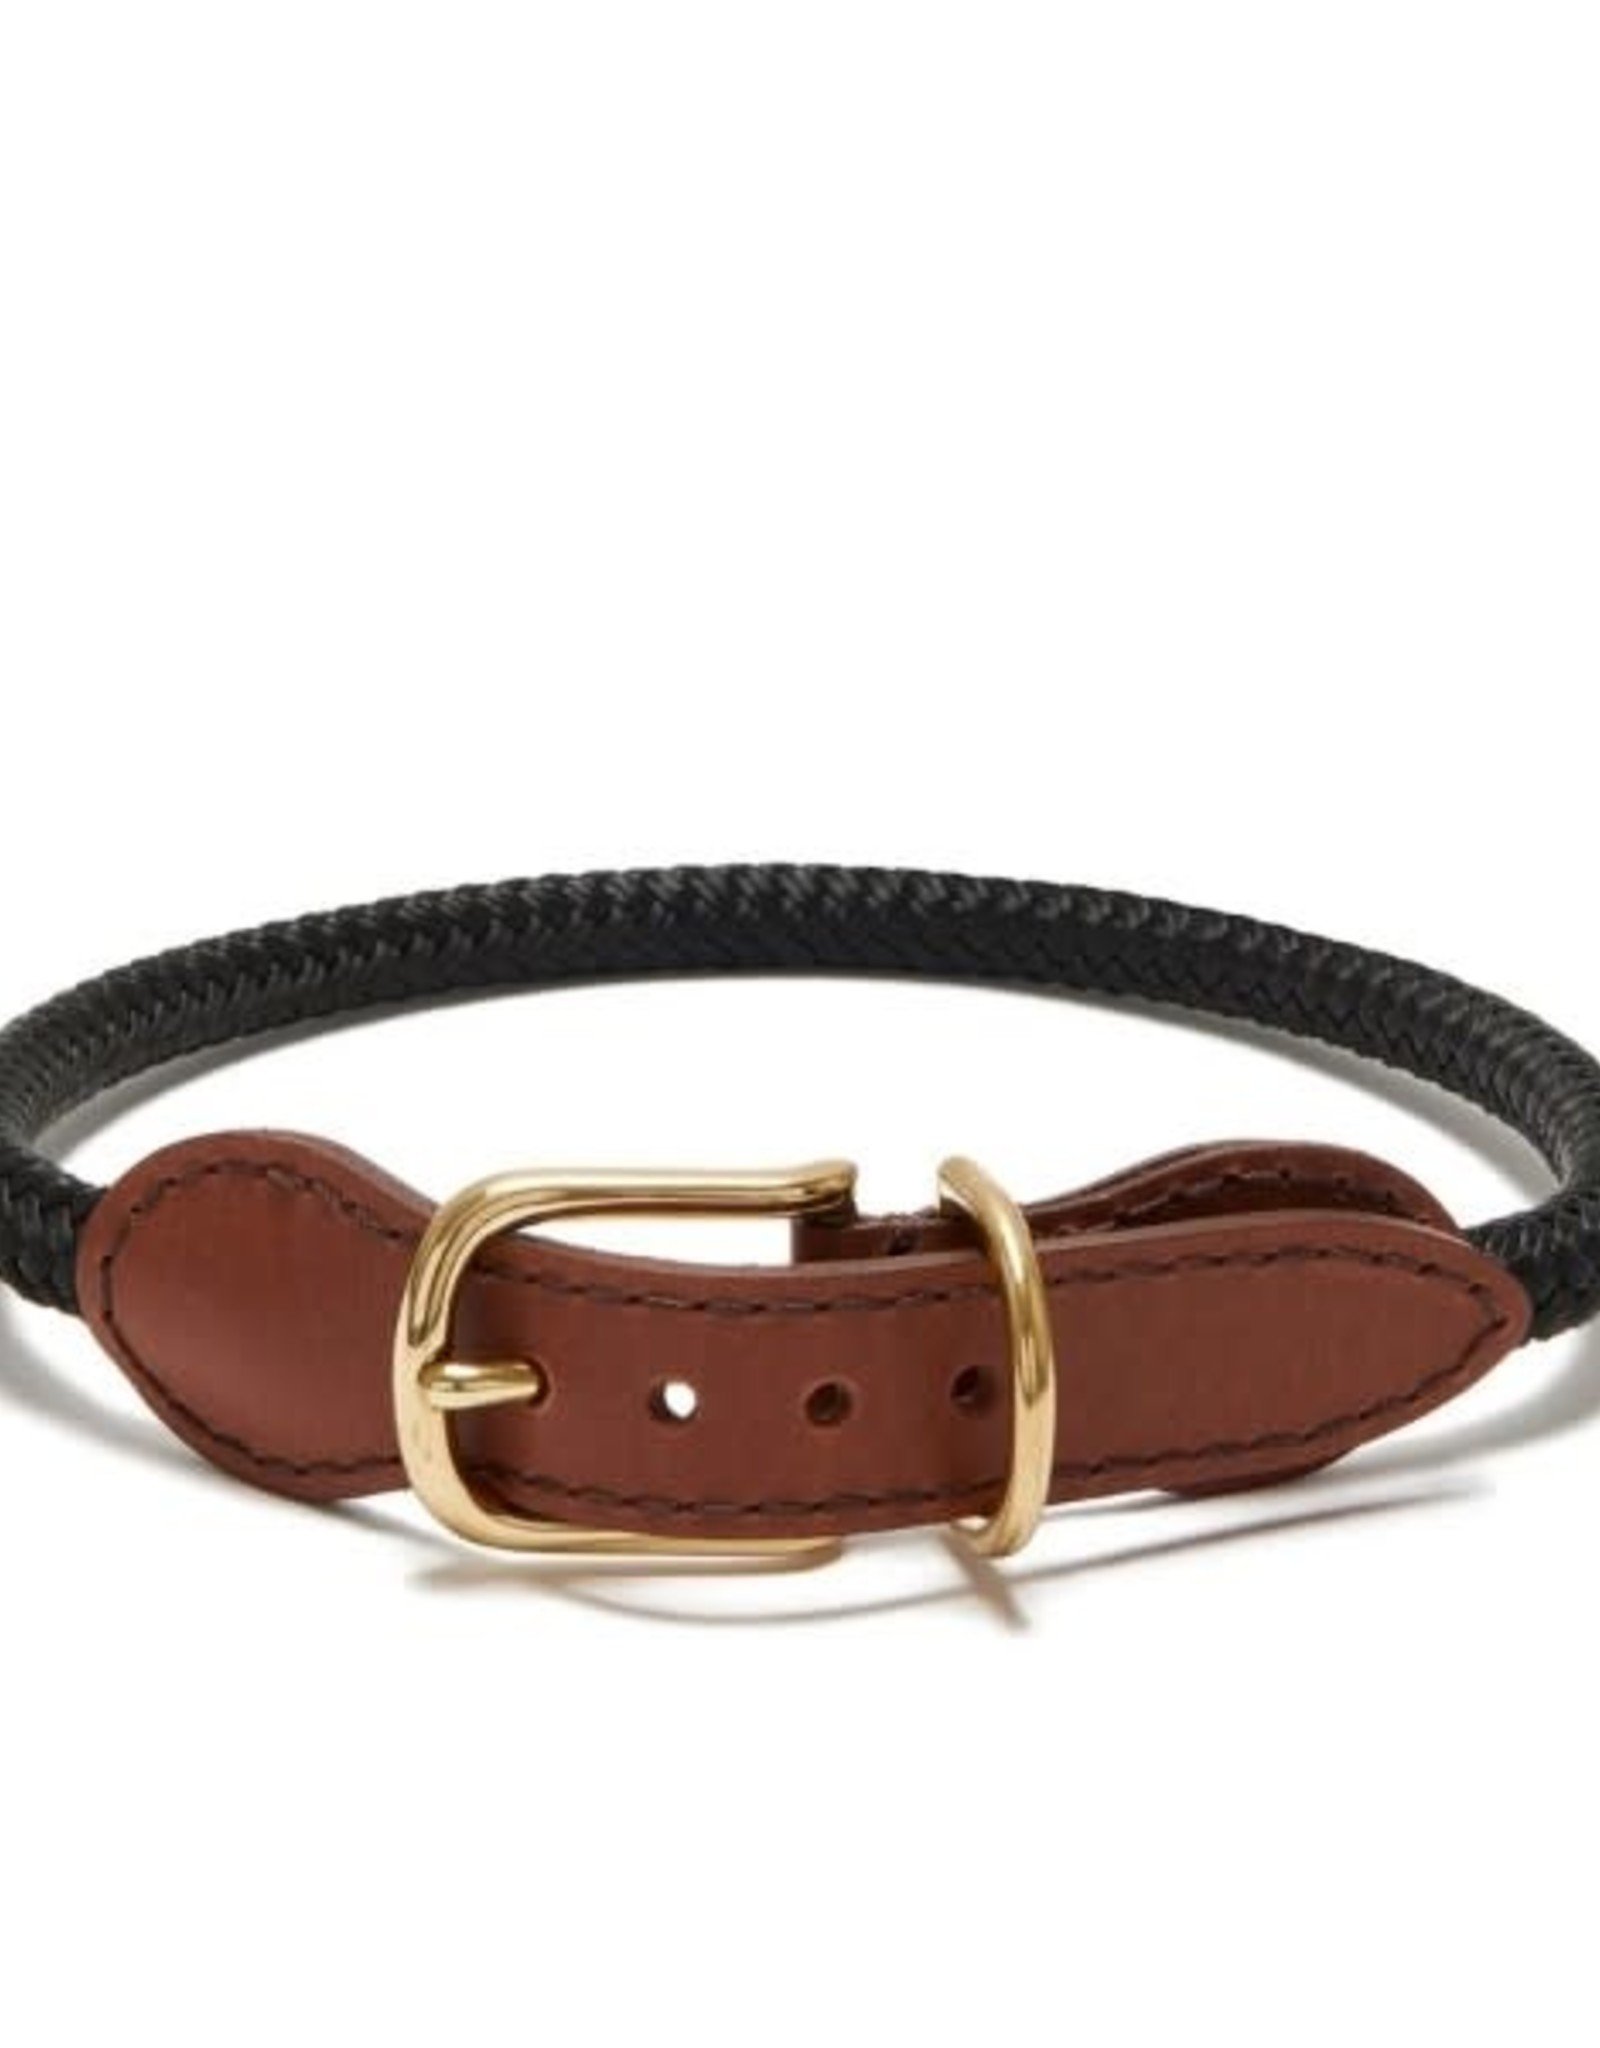 Knotty Adjustable Rope Collar - Black - Small